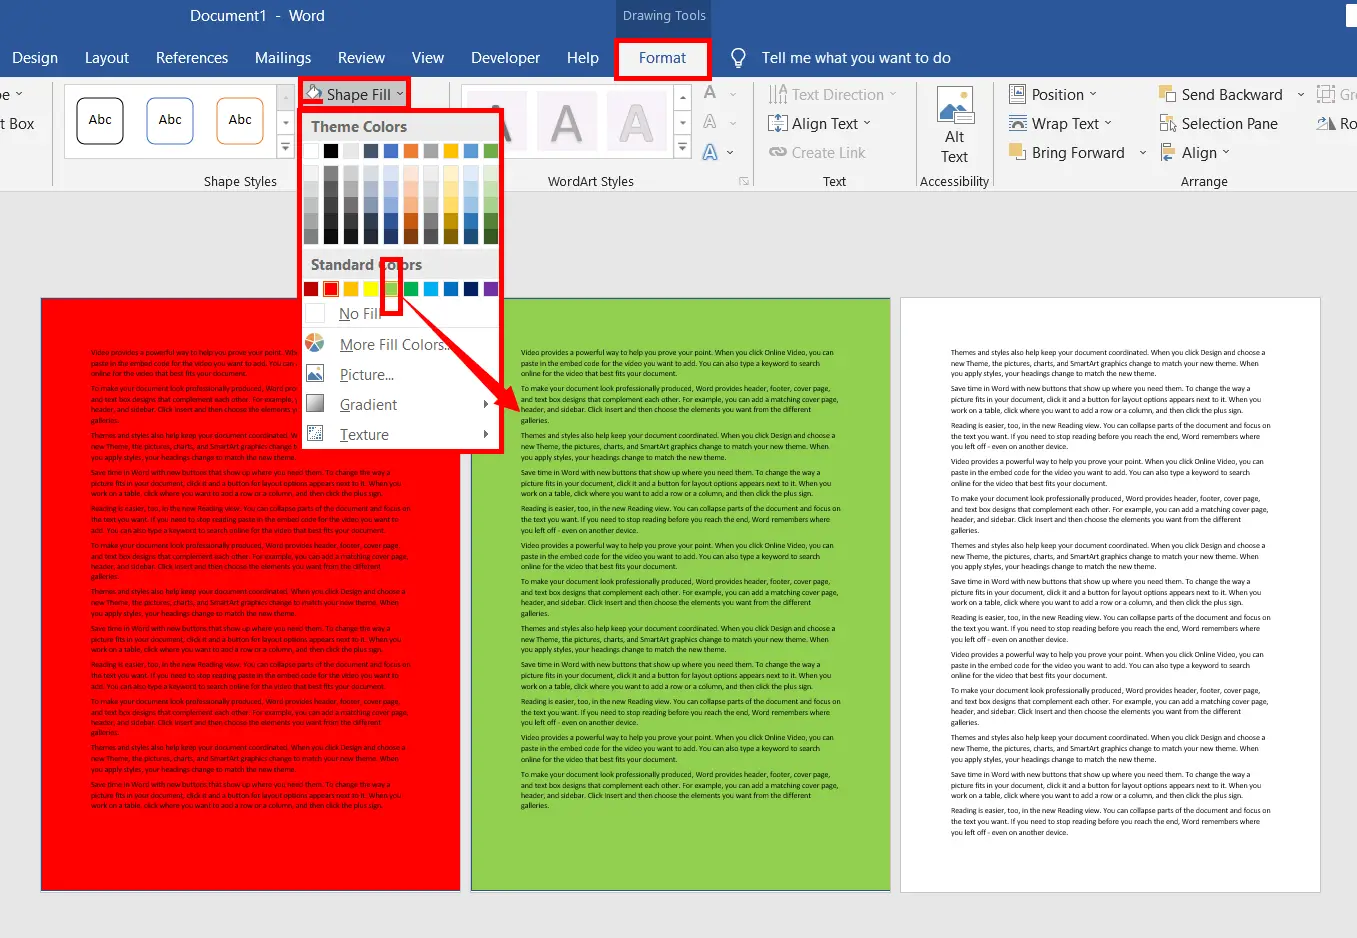 background color in word